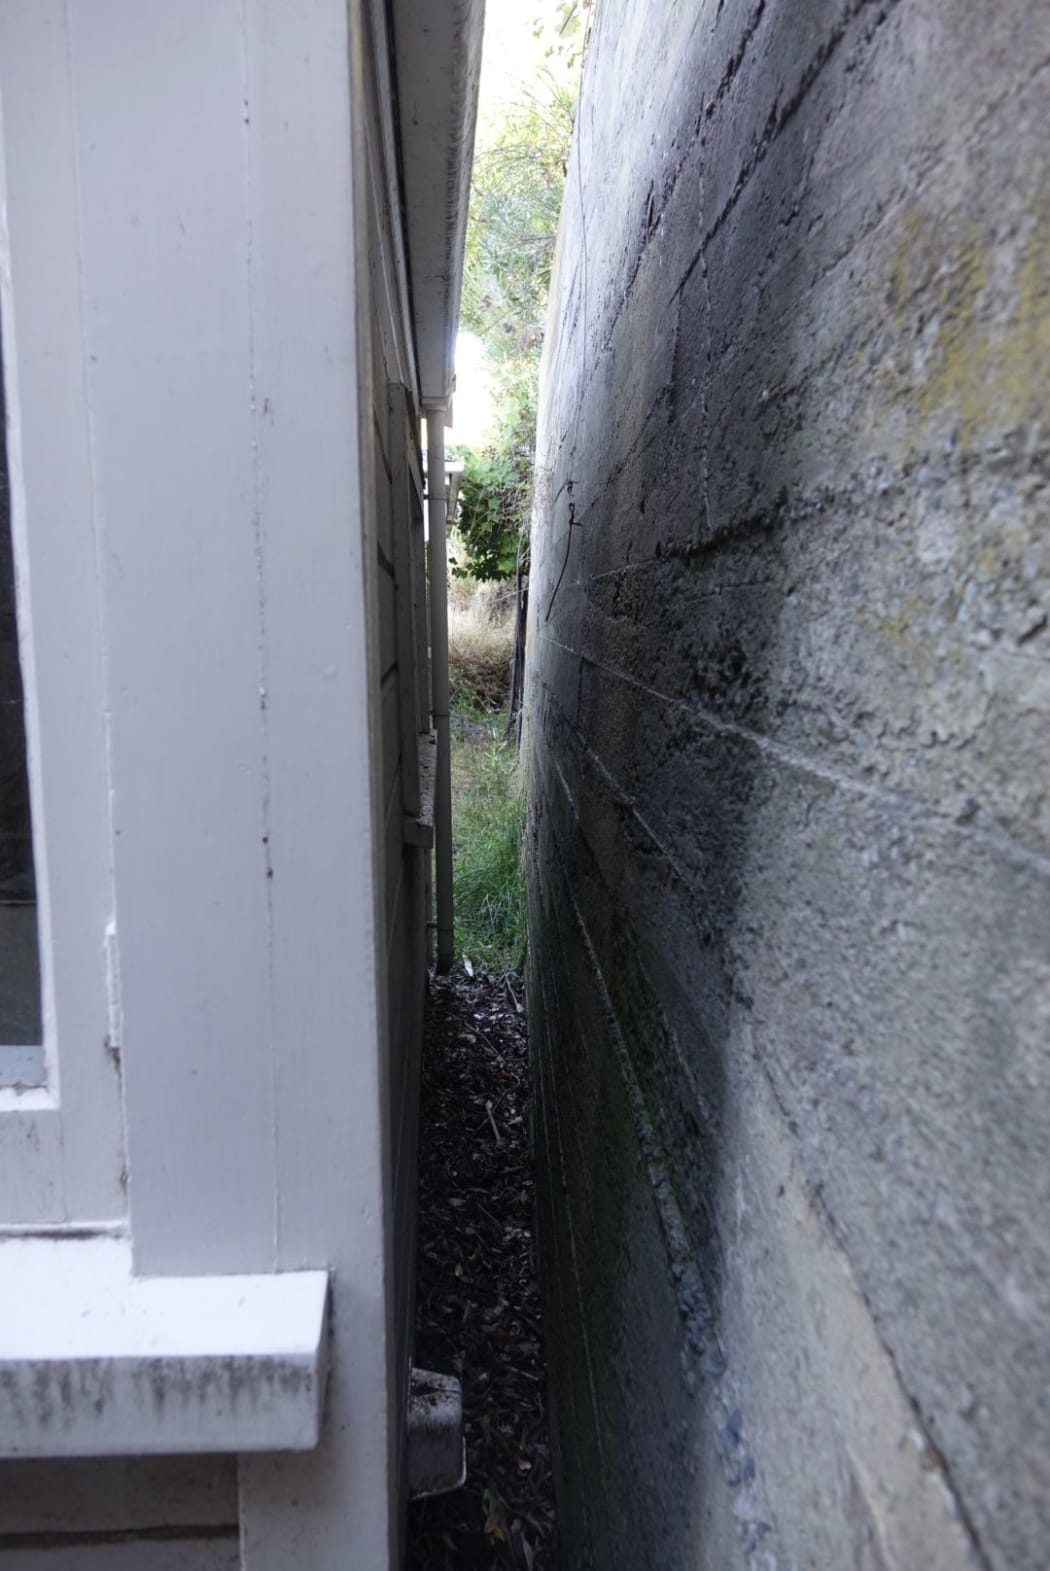 A retaining wall once 1.5 metres away moves to within a few centimetres of the house.